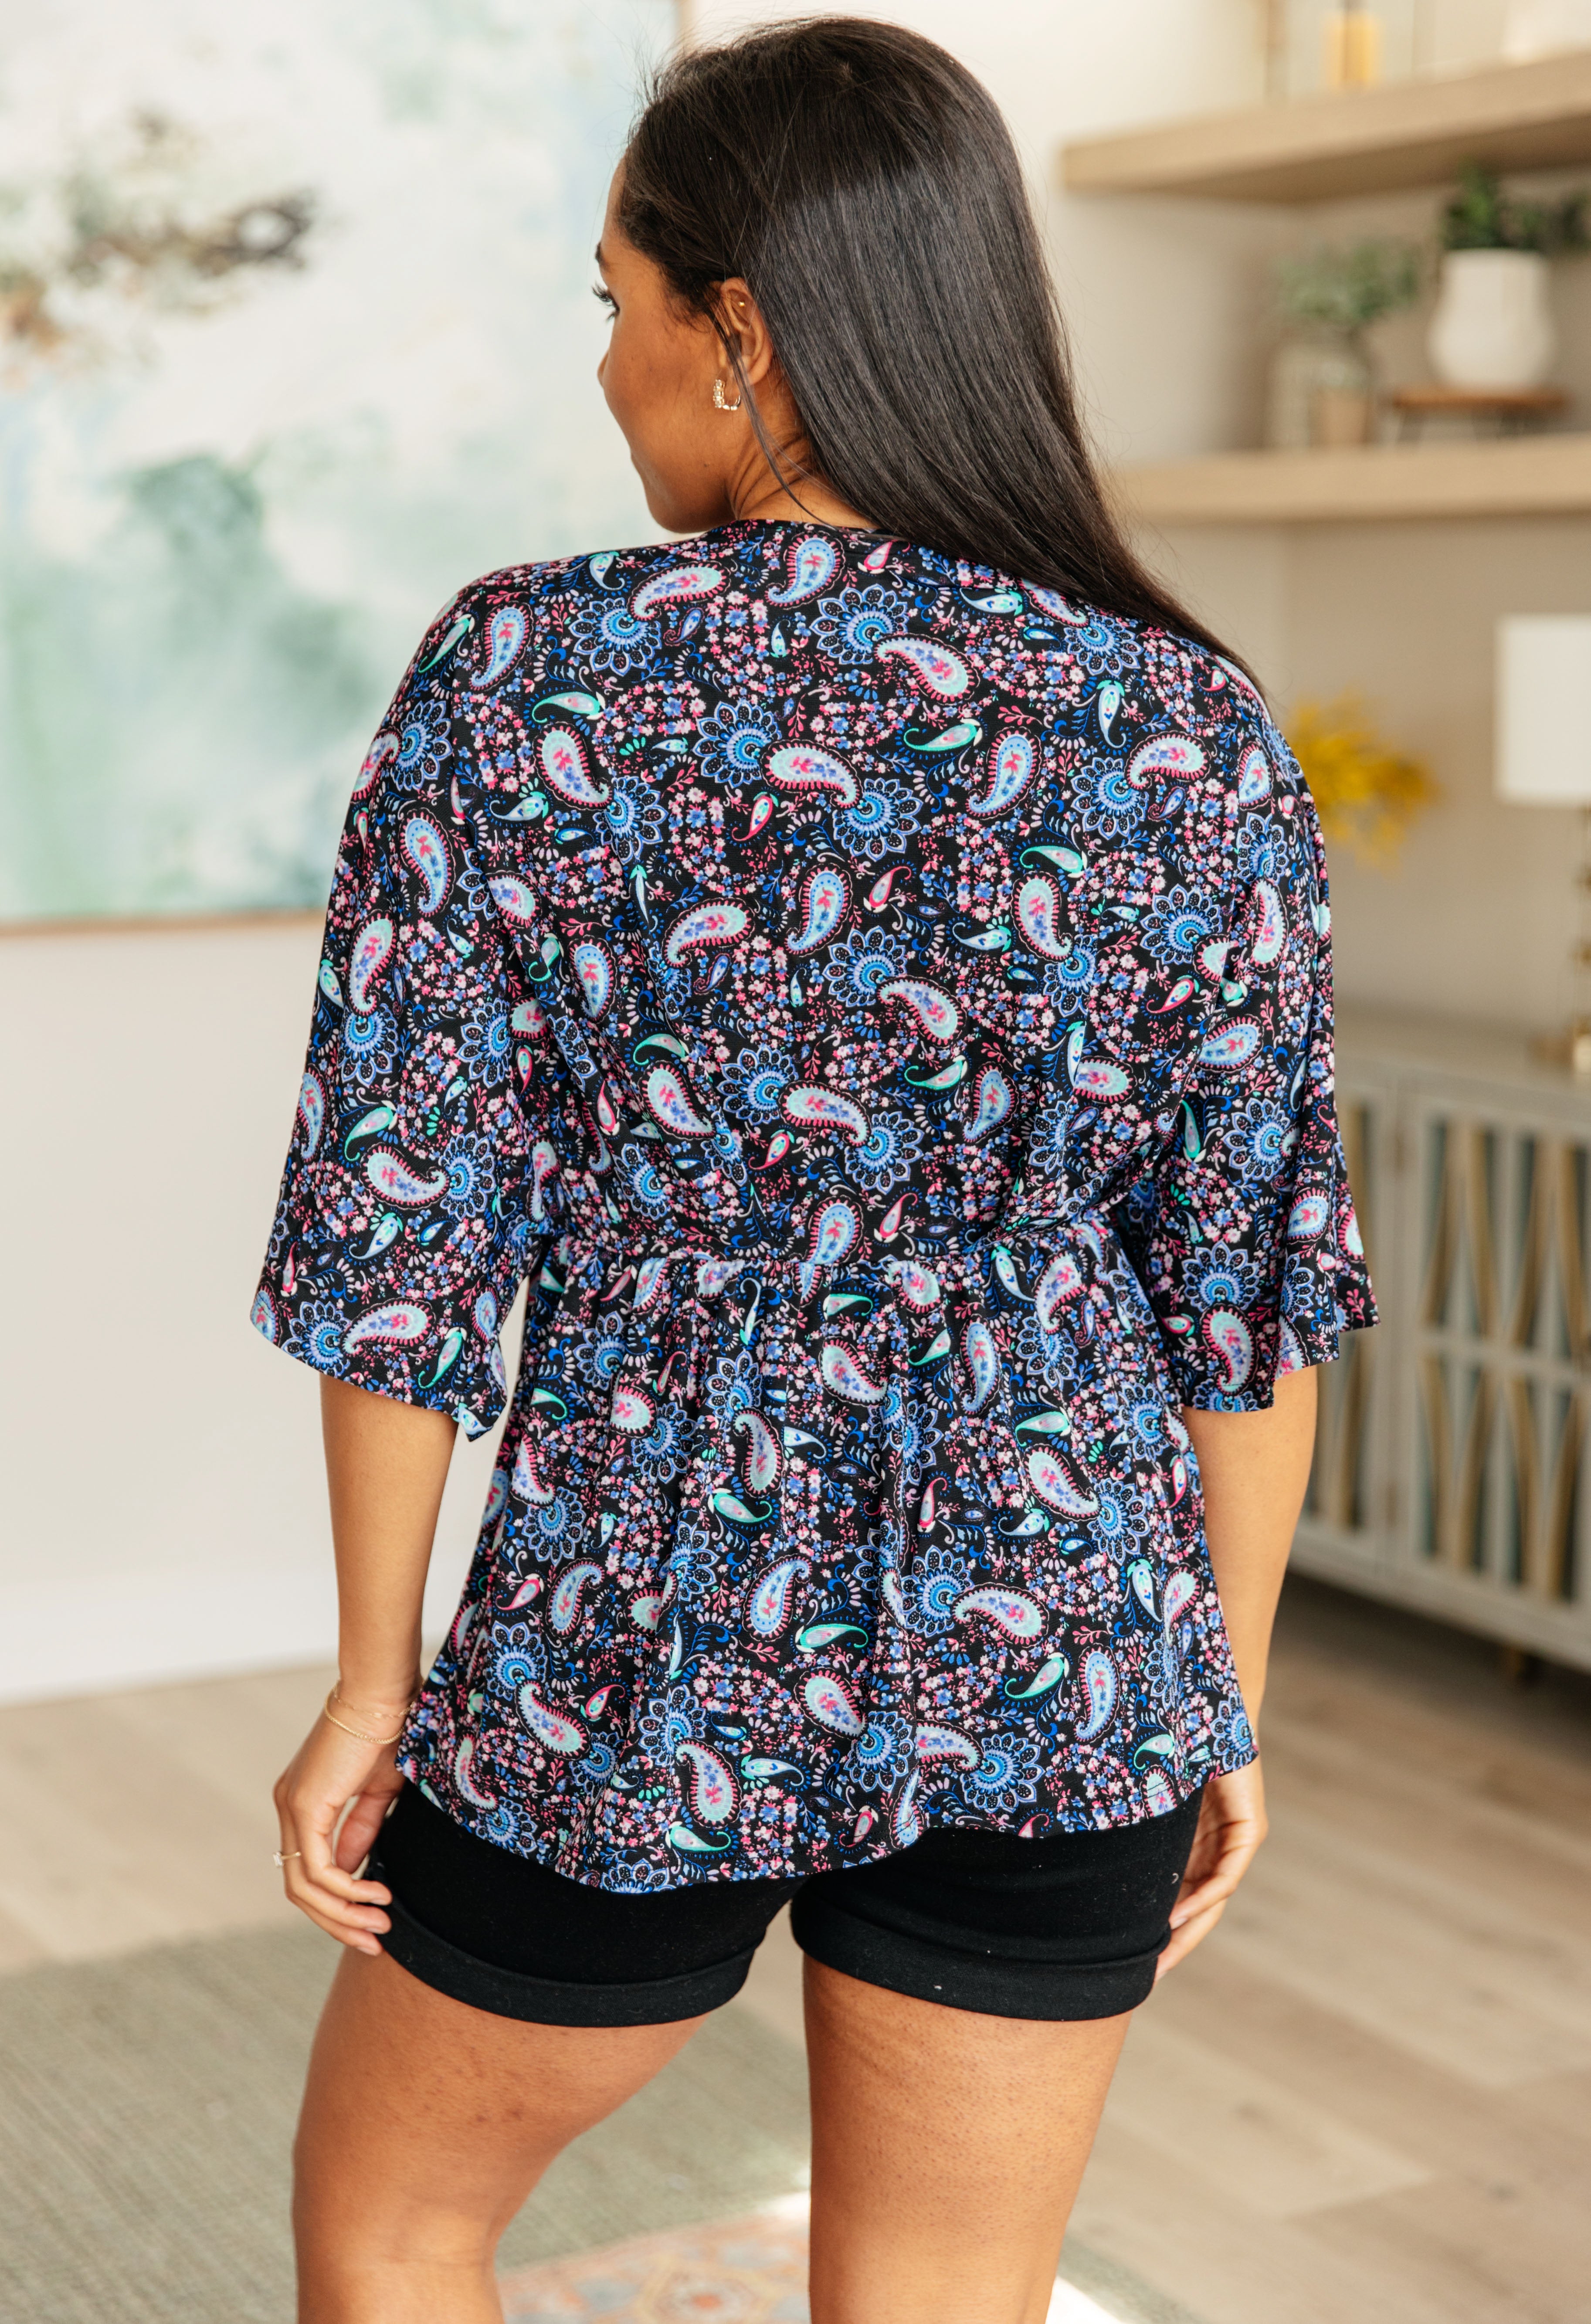 Dreamer Top in Black and Periwinkle Paisley Tops Ave Shops   